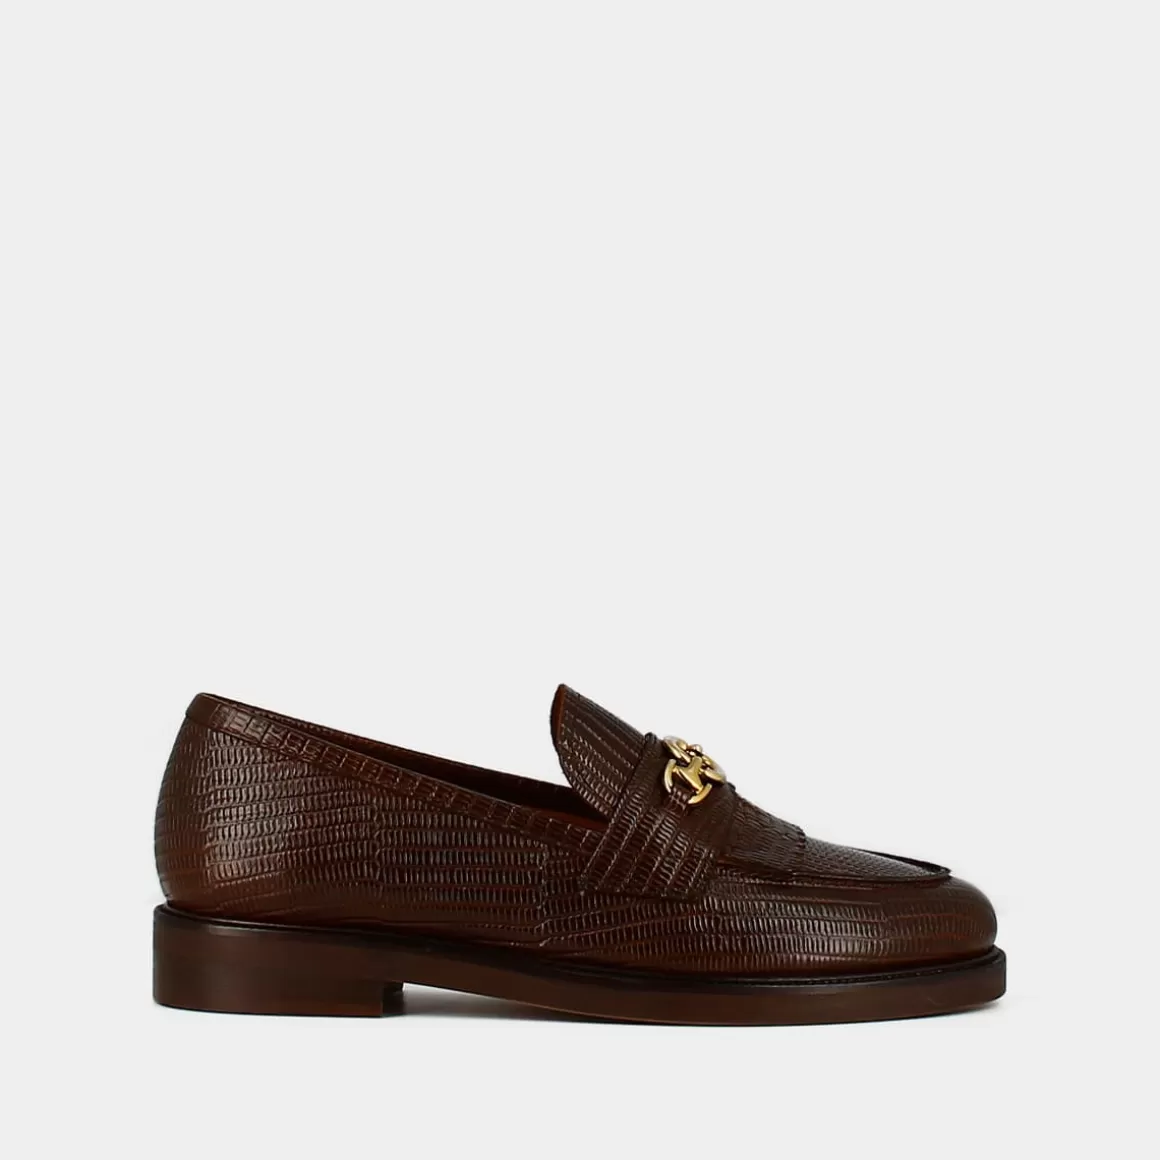 Loafers with gold buckles<Jonak Online